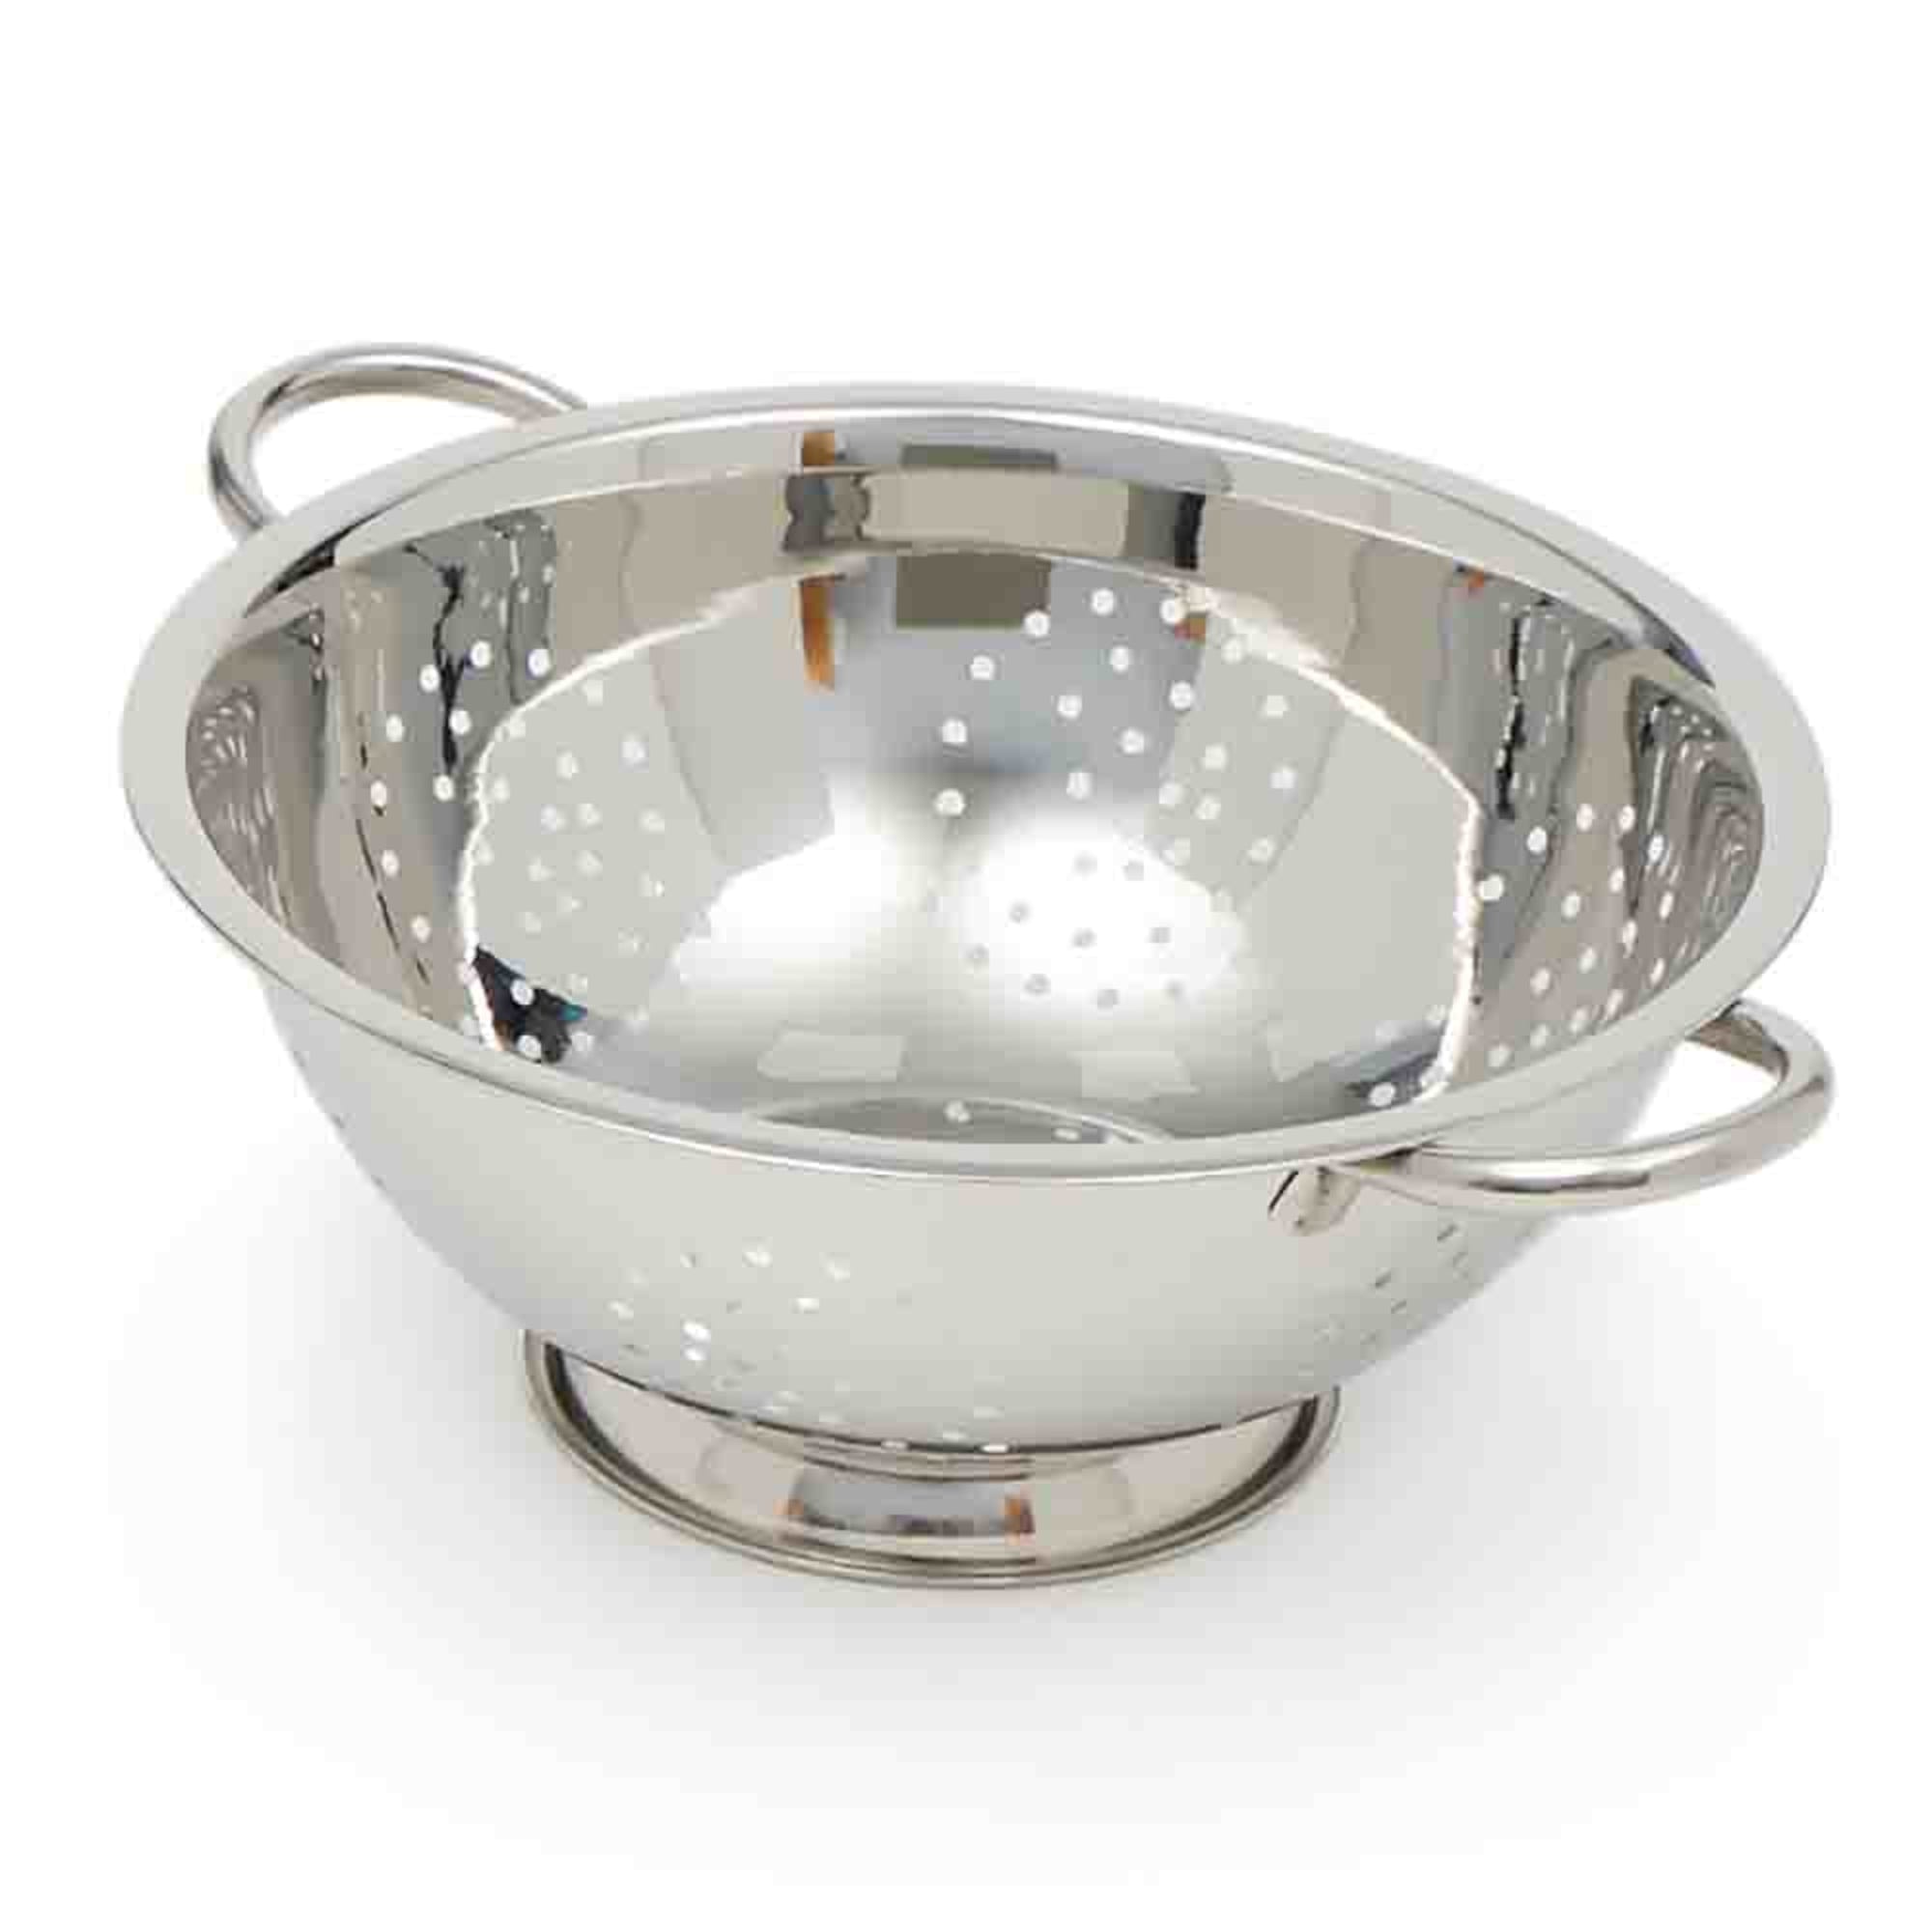 Home Basics 5 QT Stainless Steel  Deep Colander $4.00 EACH, CASE PACK OF 12